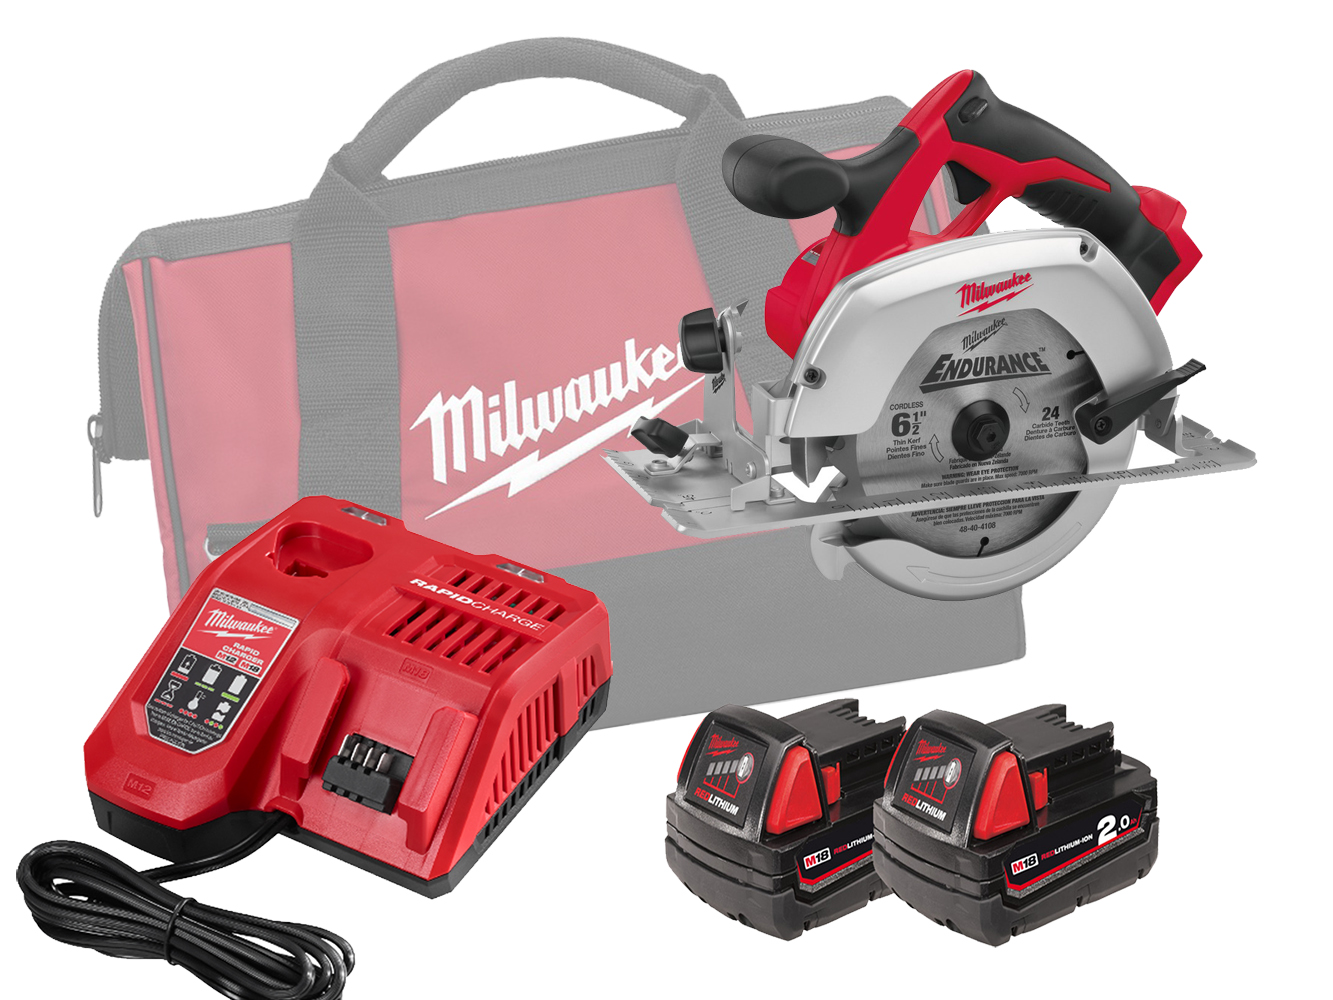 Milwaukee HD18CS 18V Heavy Duty 165mm (55mm) Circular Saw for Wood and Plastic - 2.0Ah Pack